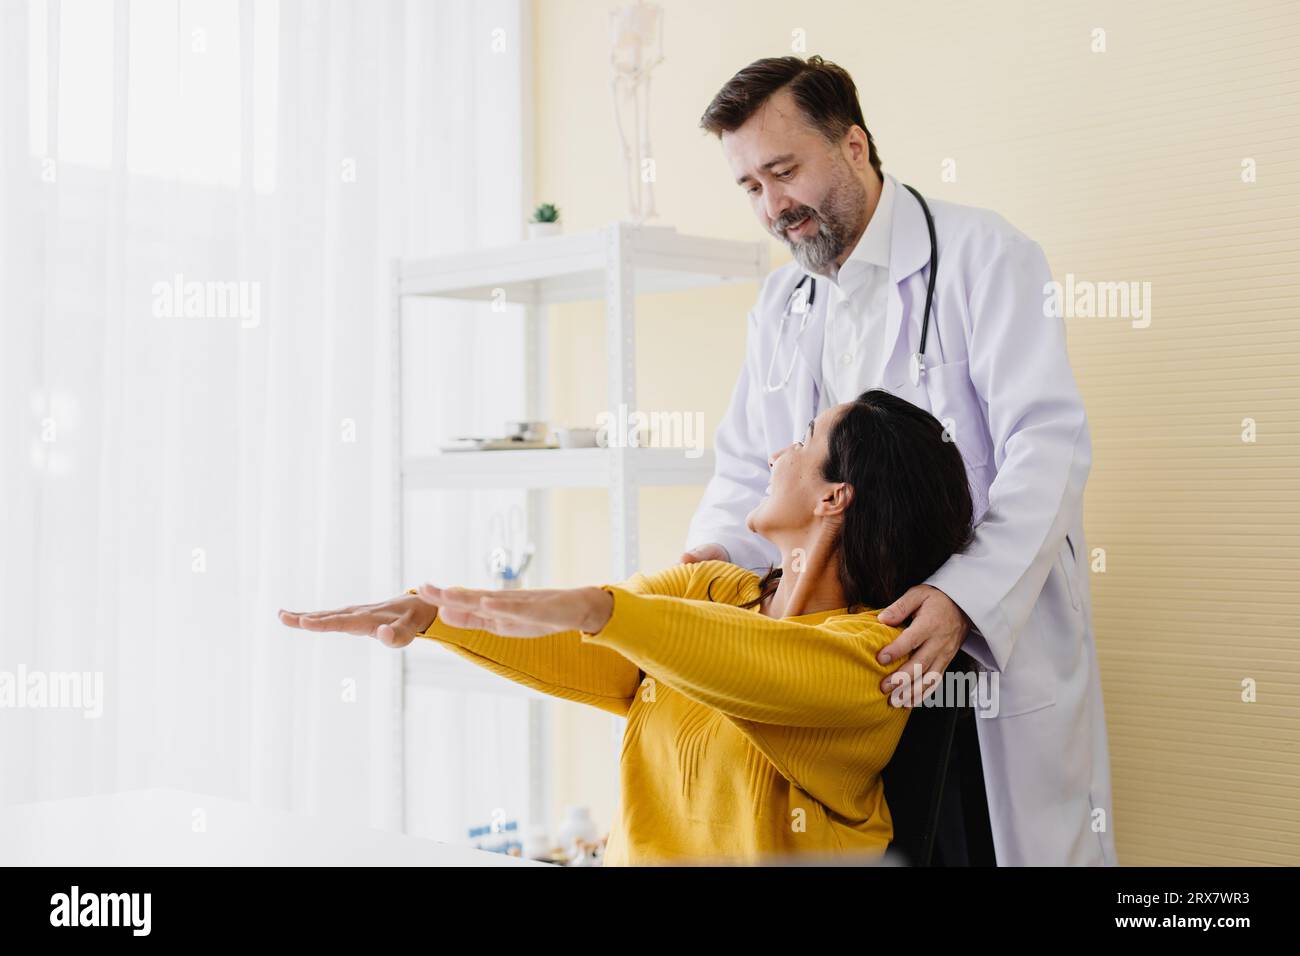 Patient woman arm muscle pain meet senior doctor for physical therapy healing and recovery back working good and she very happy Stock Photo